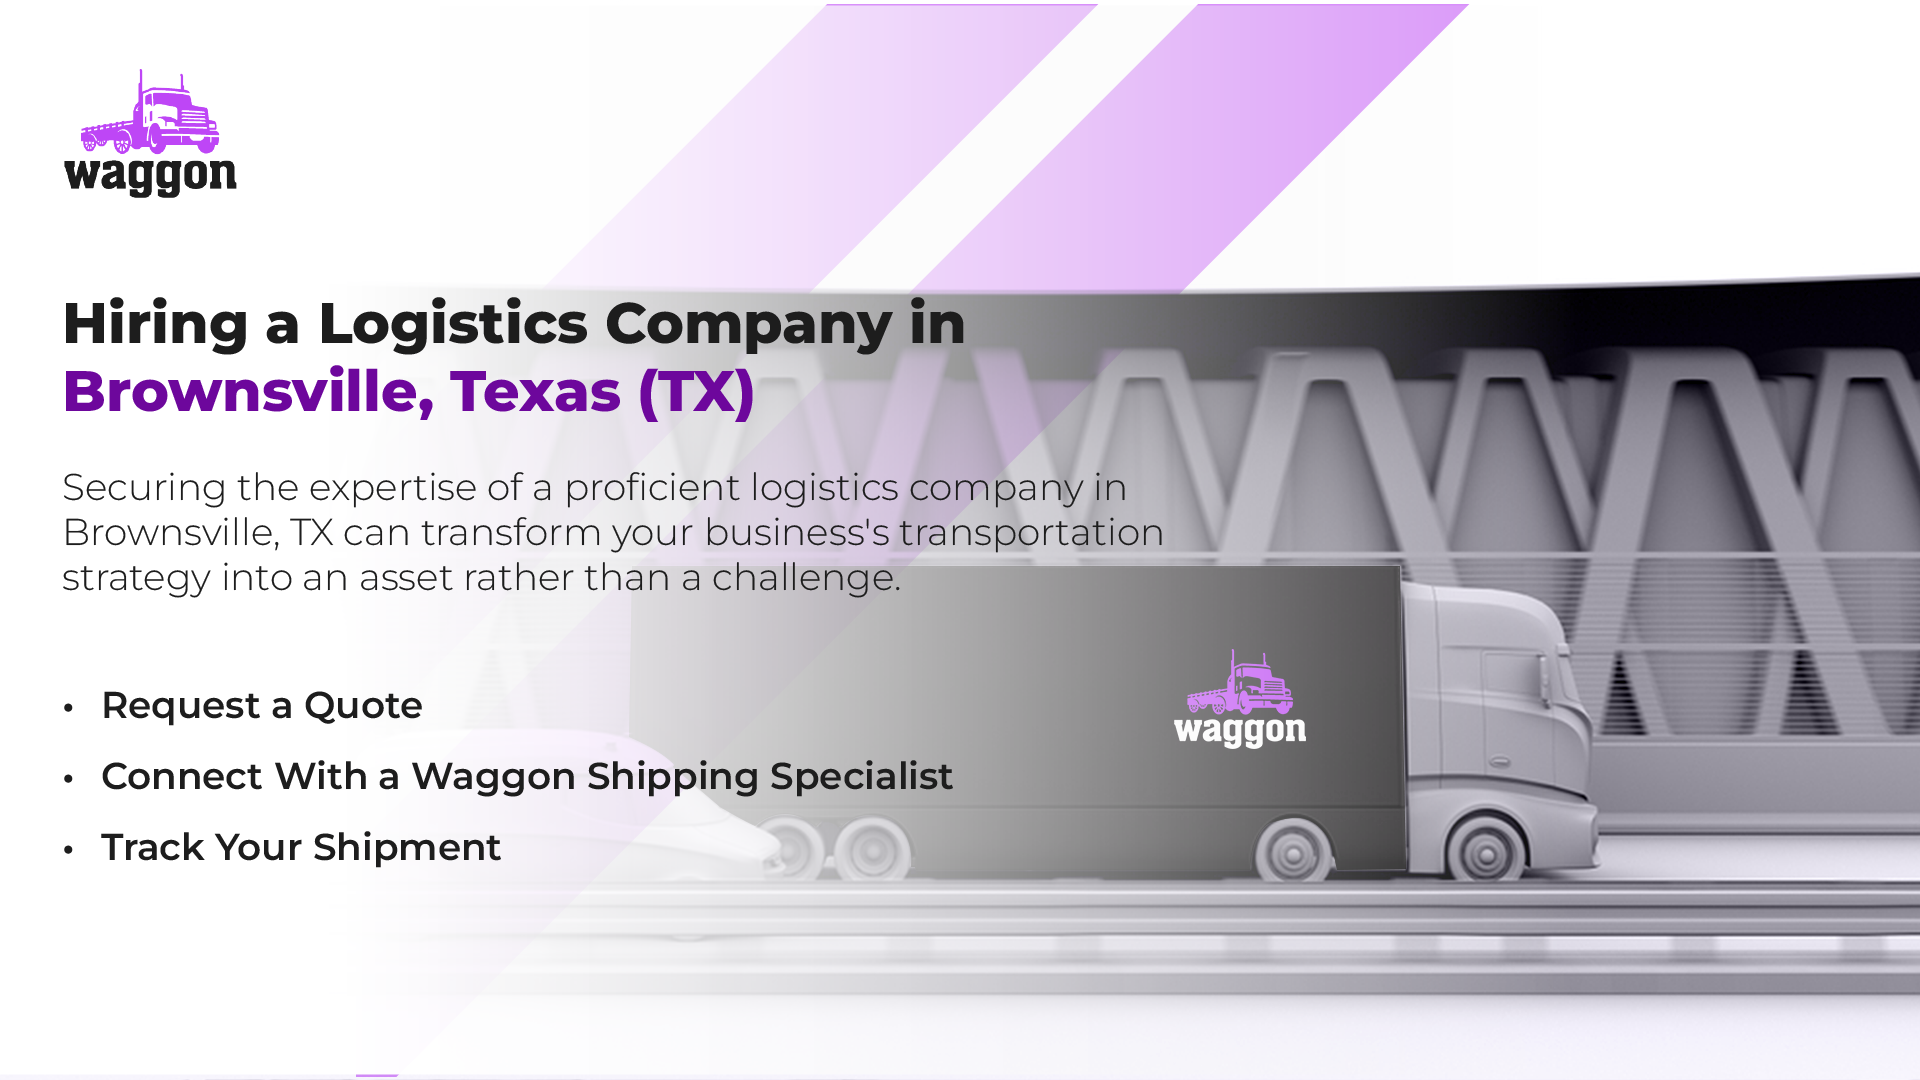 Hiring A Logistics Company in Brownsville, Texas (TX)